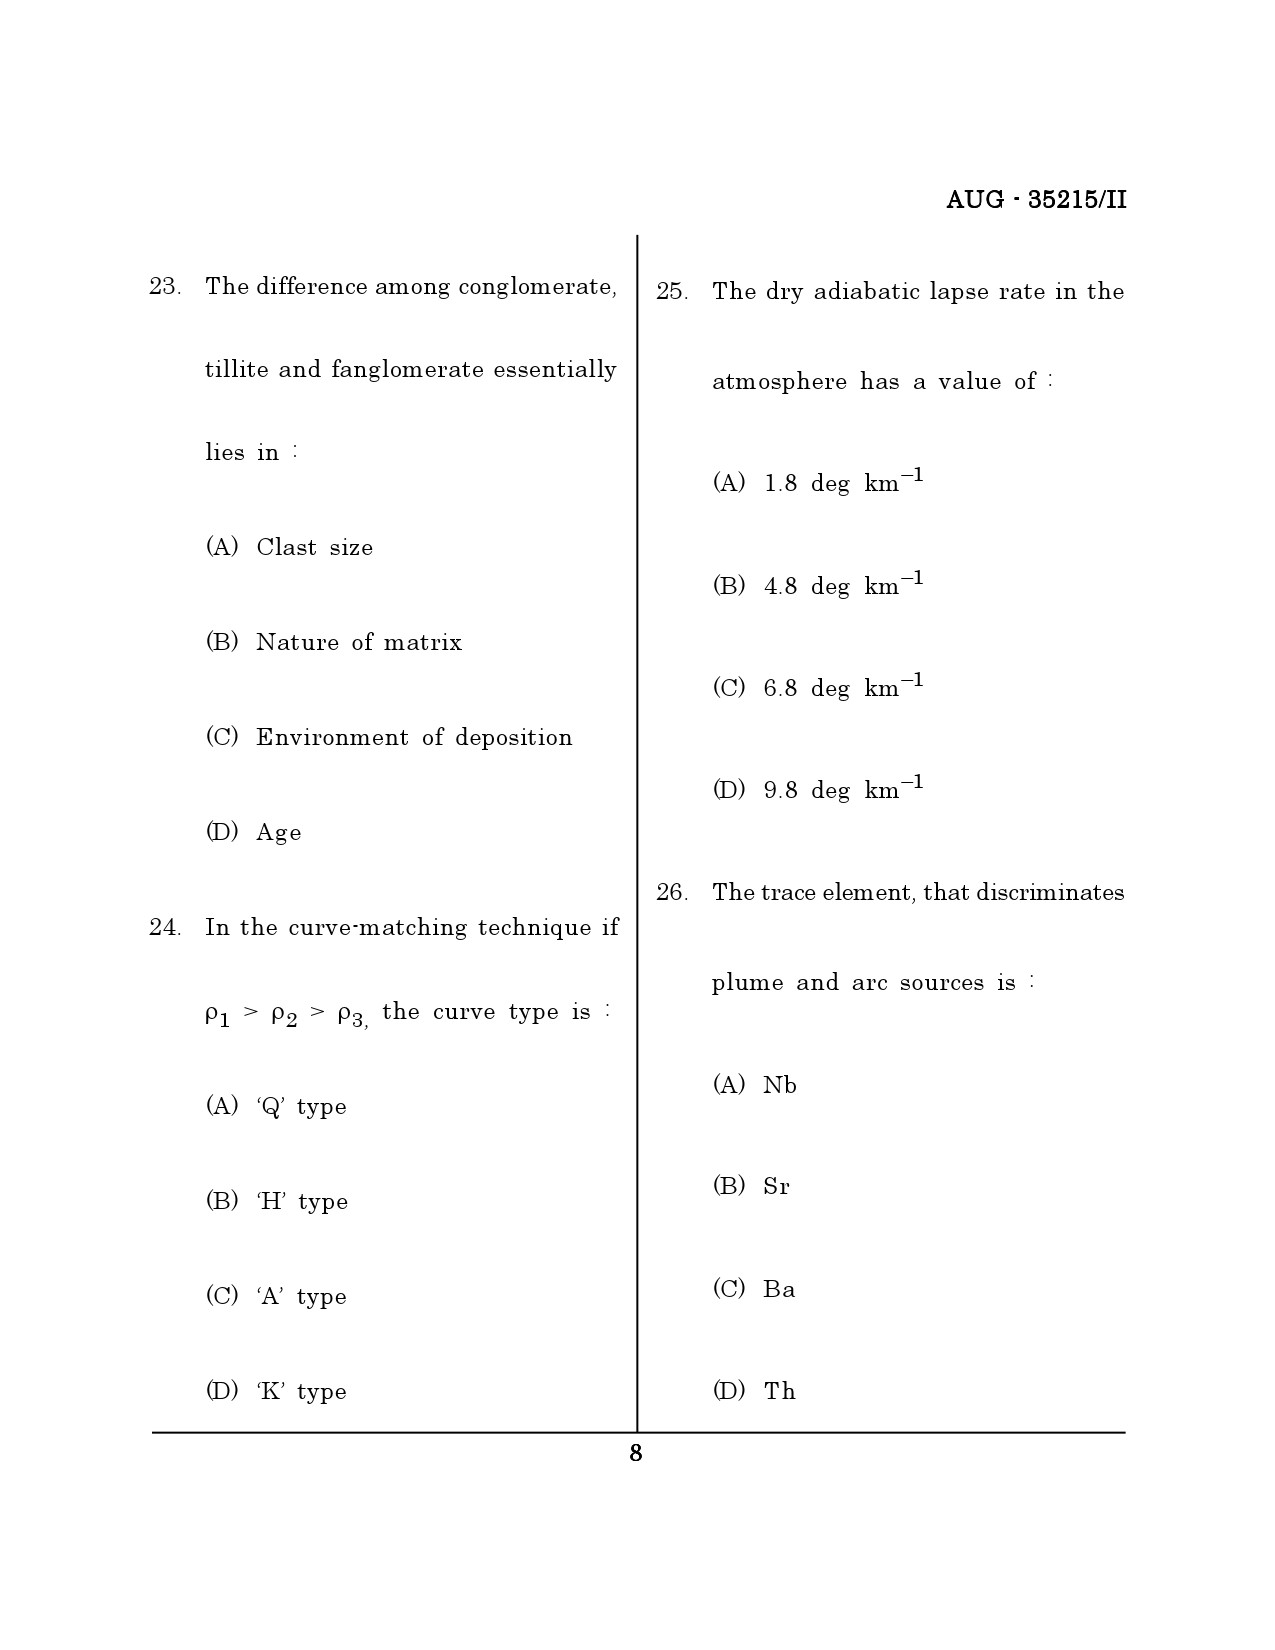 Maharashtra SET Earth Atmospheric Ocean Planetary Science Question Paper II August 2015 7